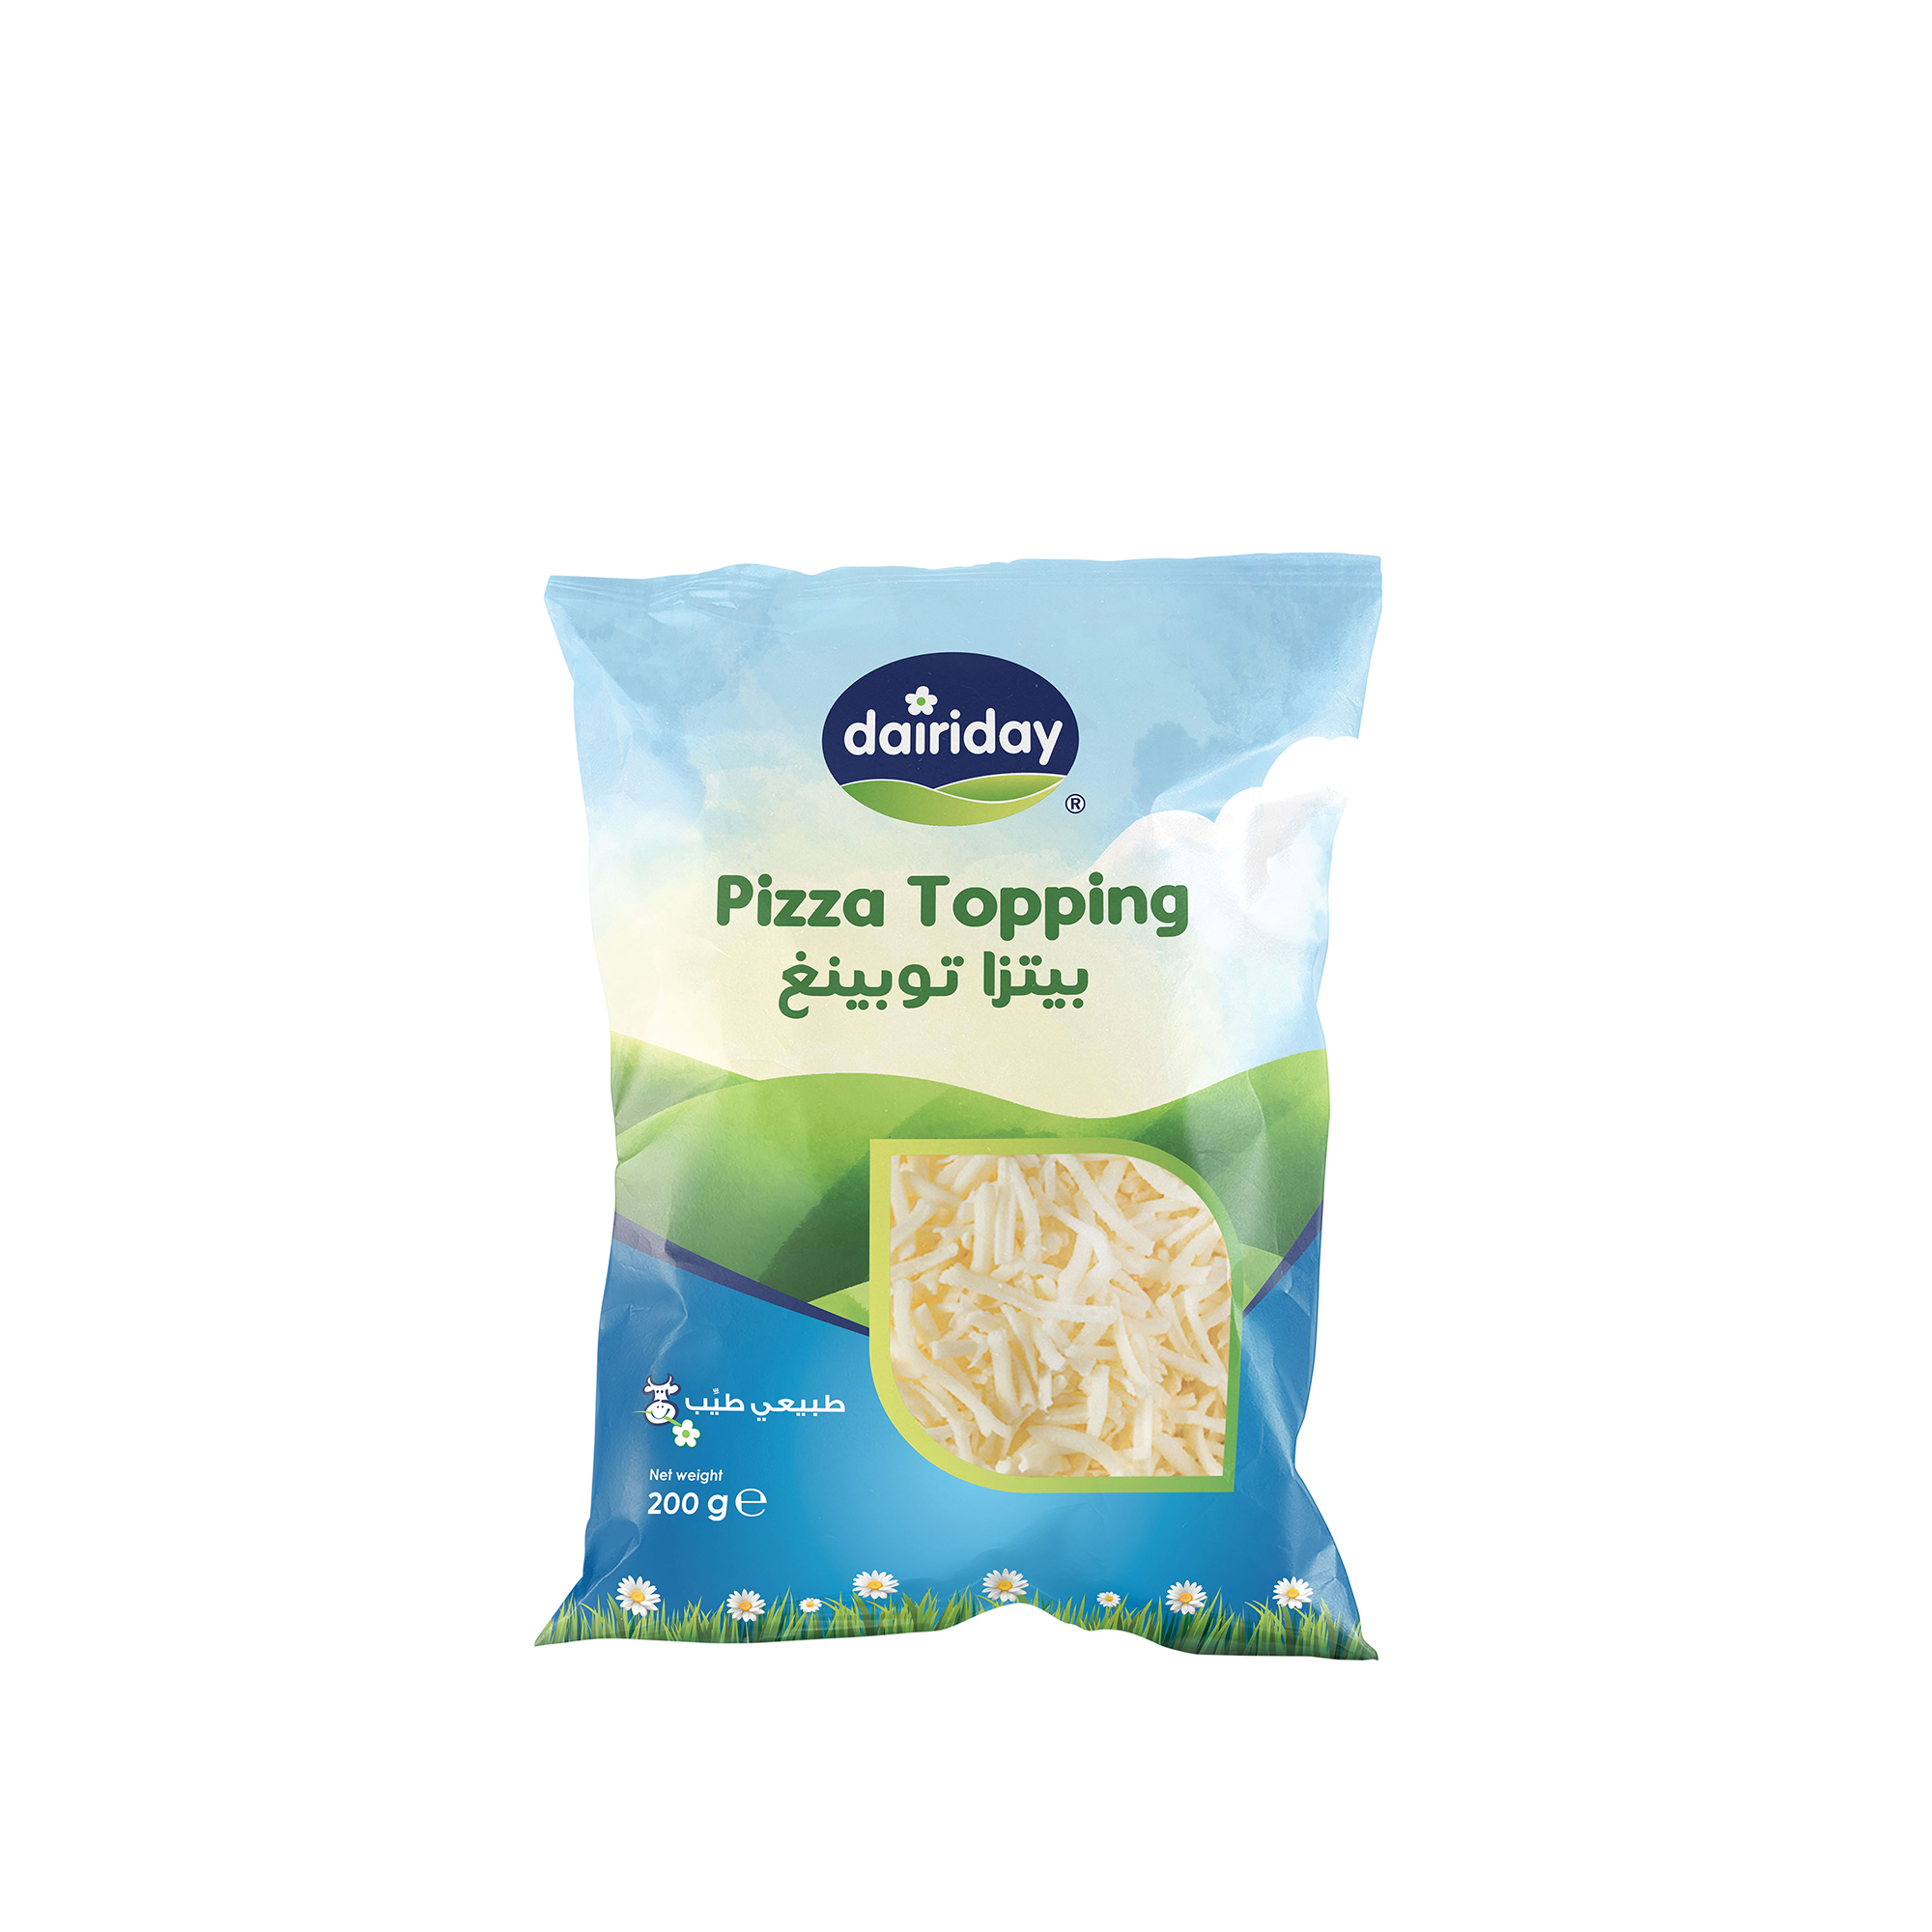 Dairiday-Shredded-Pizza-Topping-200g-cheese